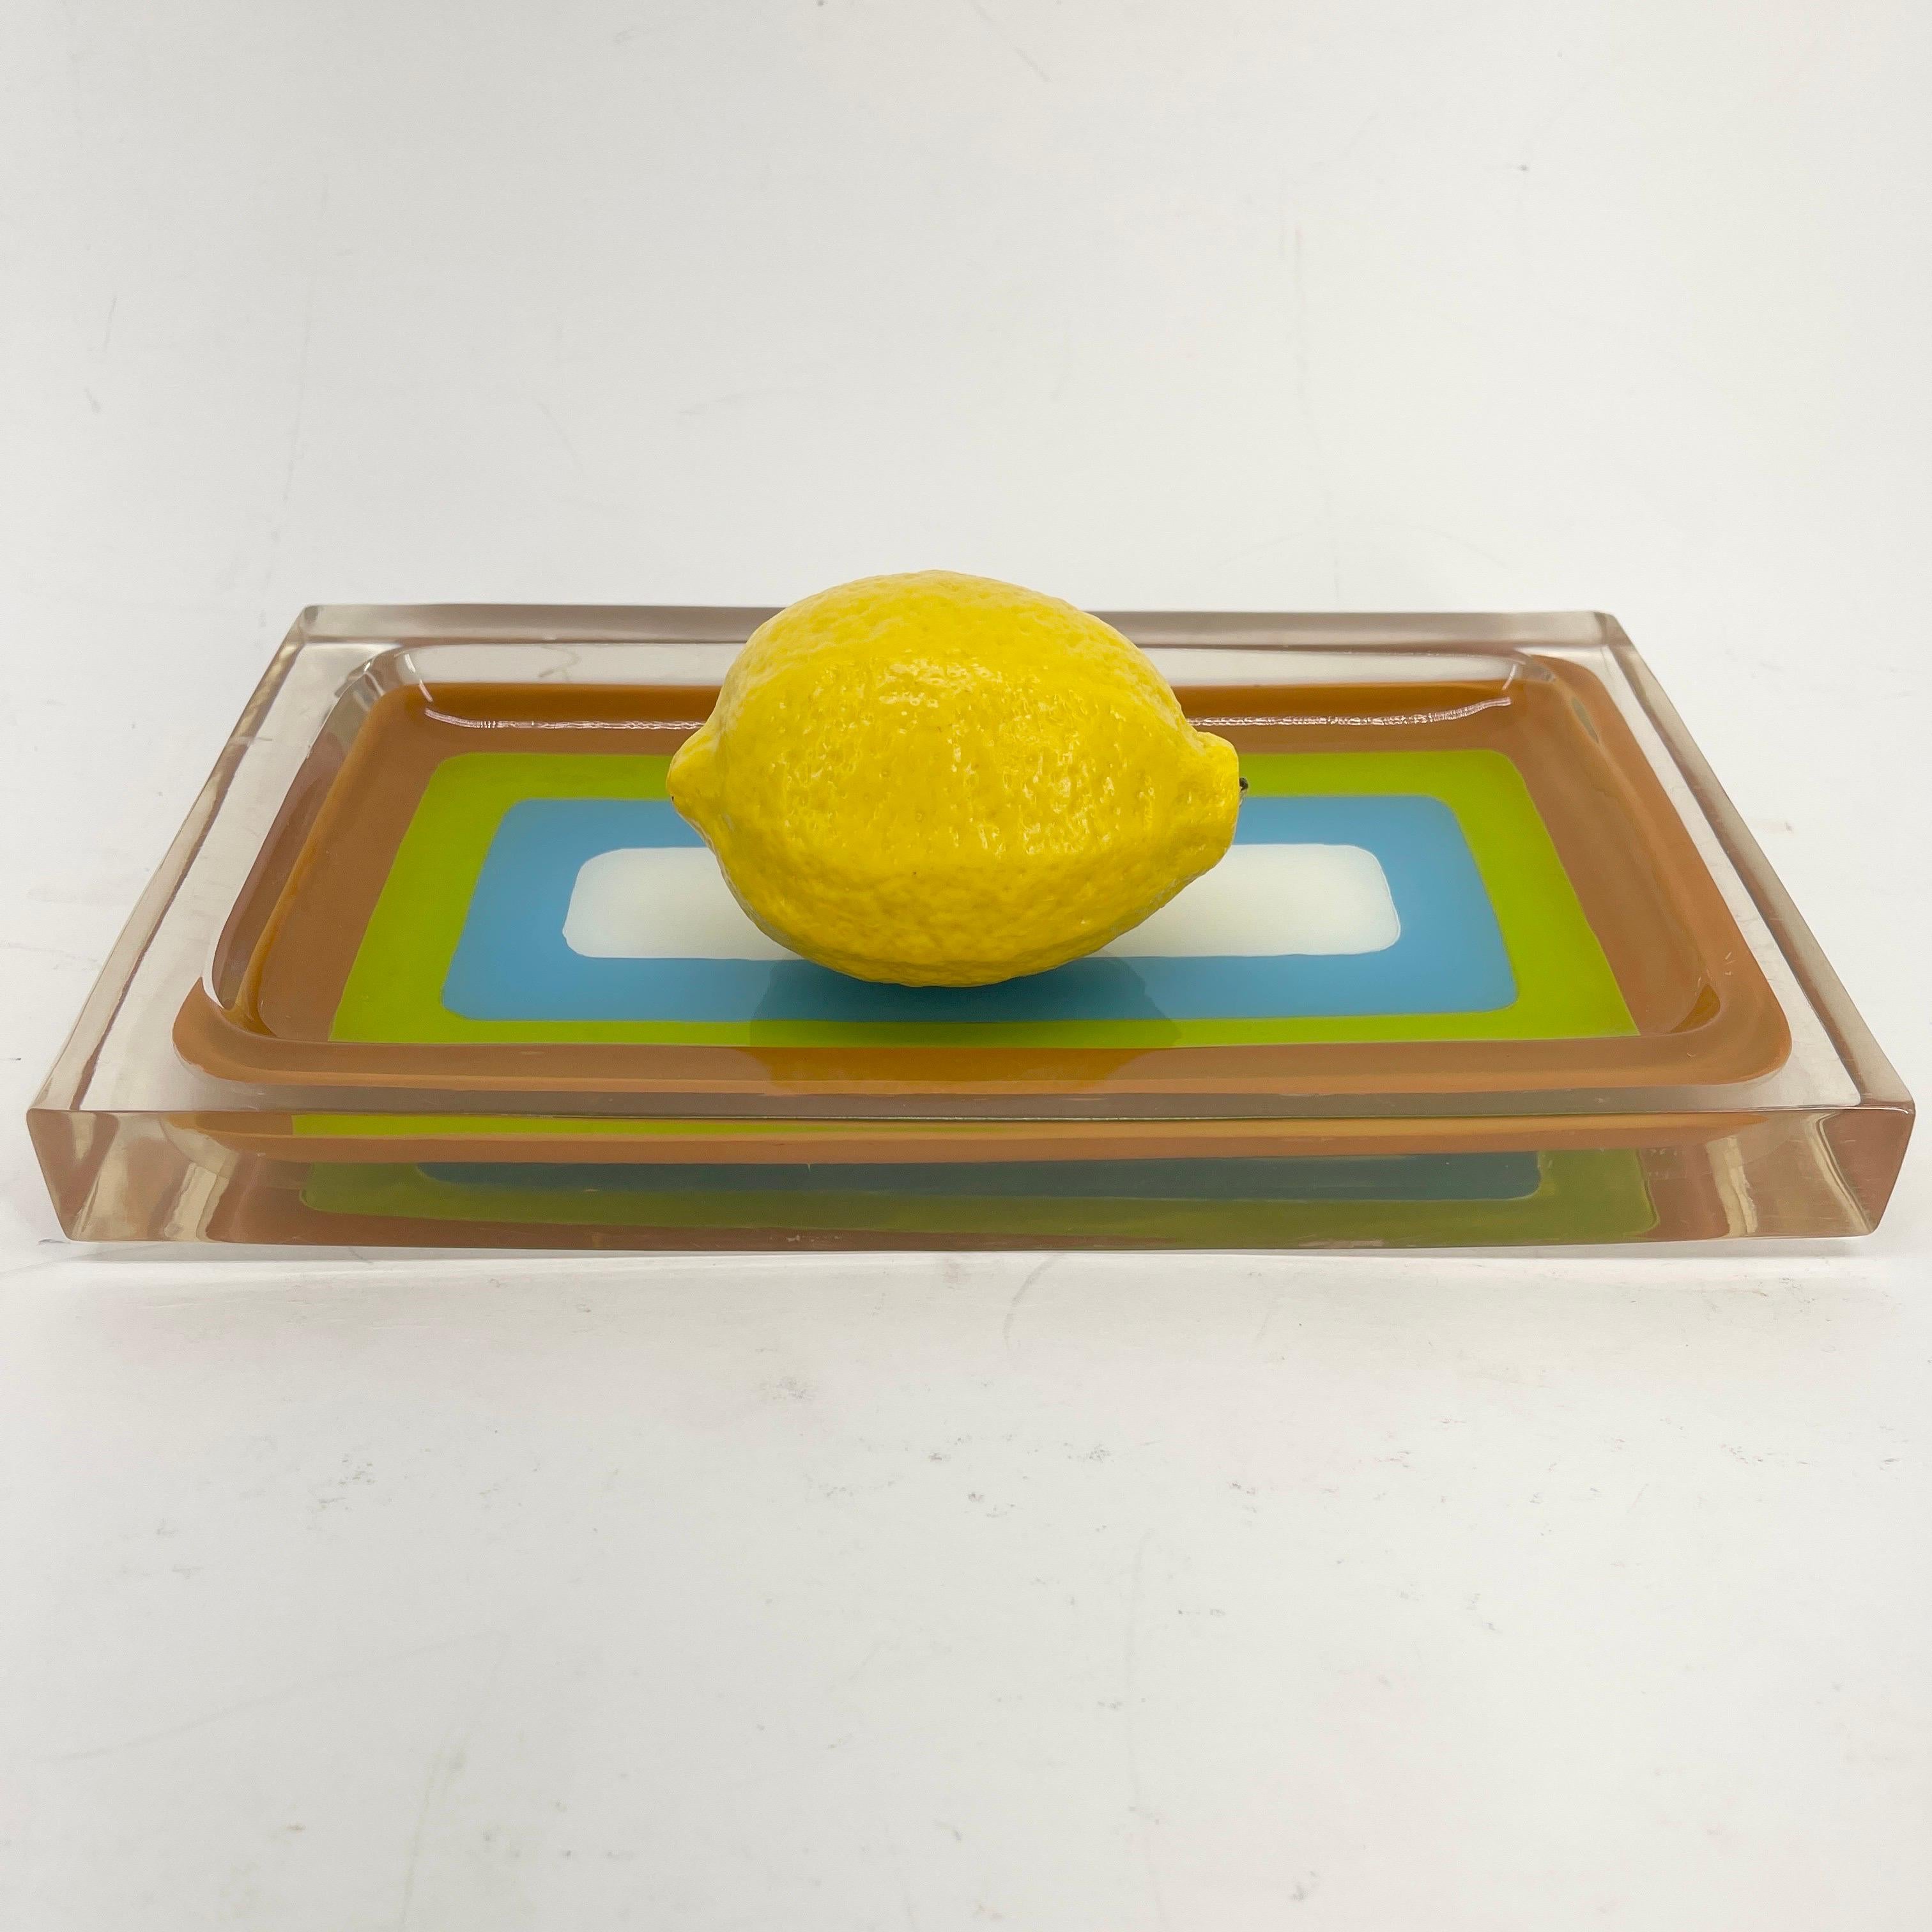 Hand-Crafted Italian Midcentury Rectangular Multicolored Colored Lucite Tray, circa 1960s For Sale